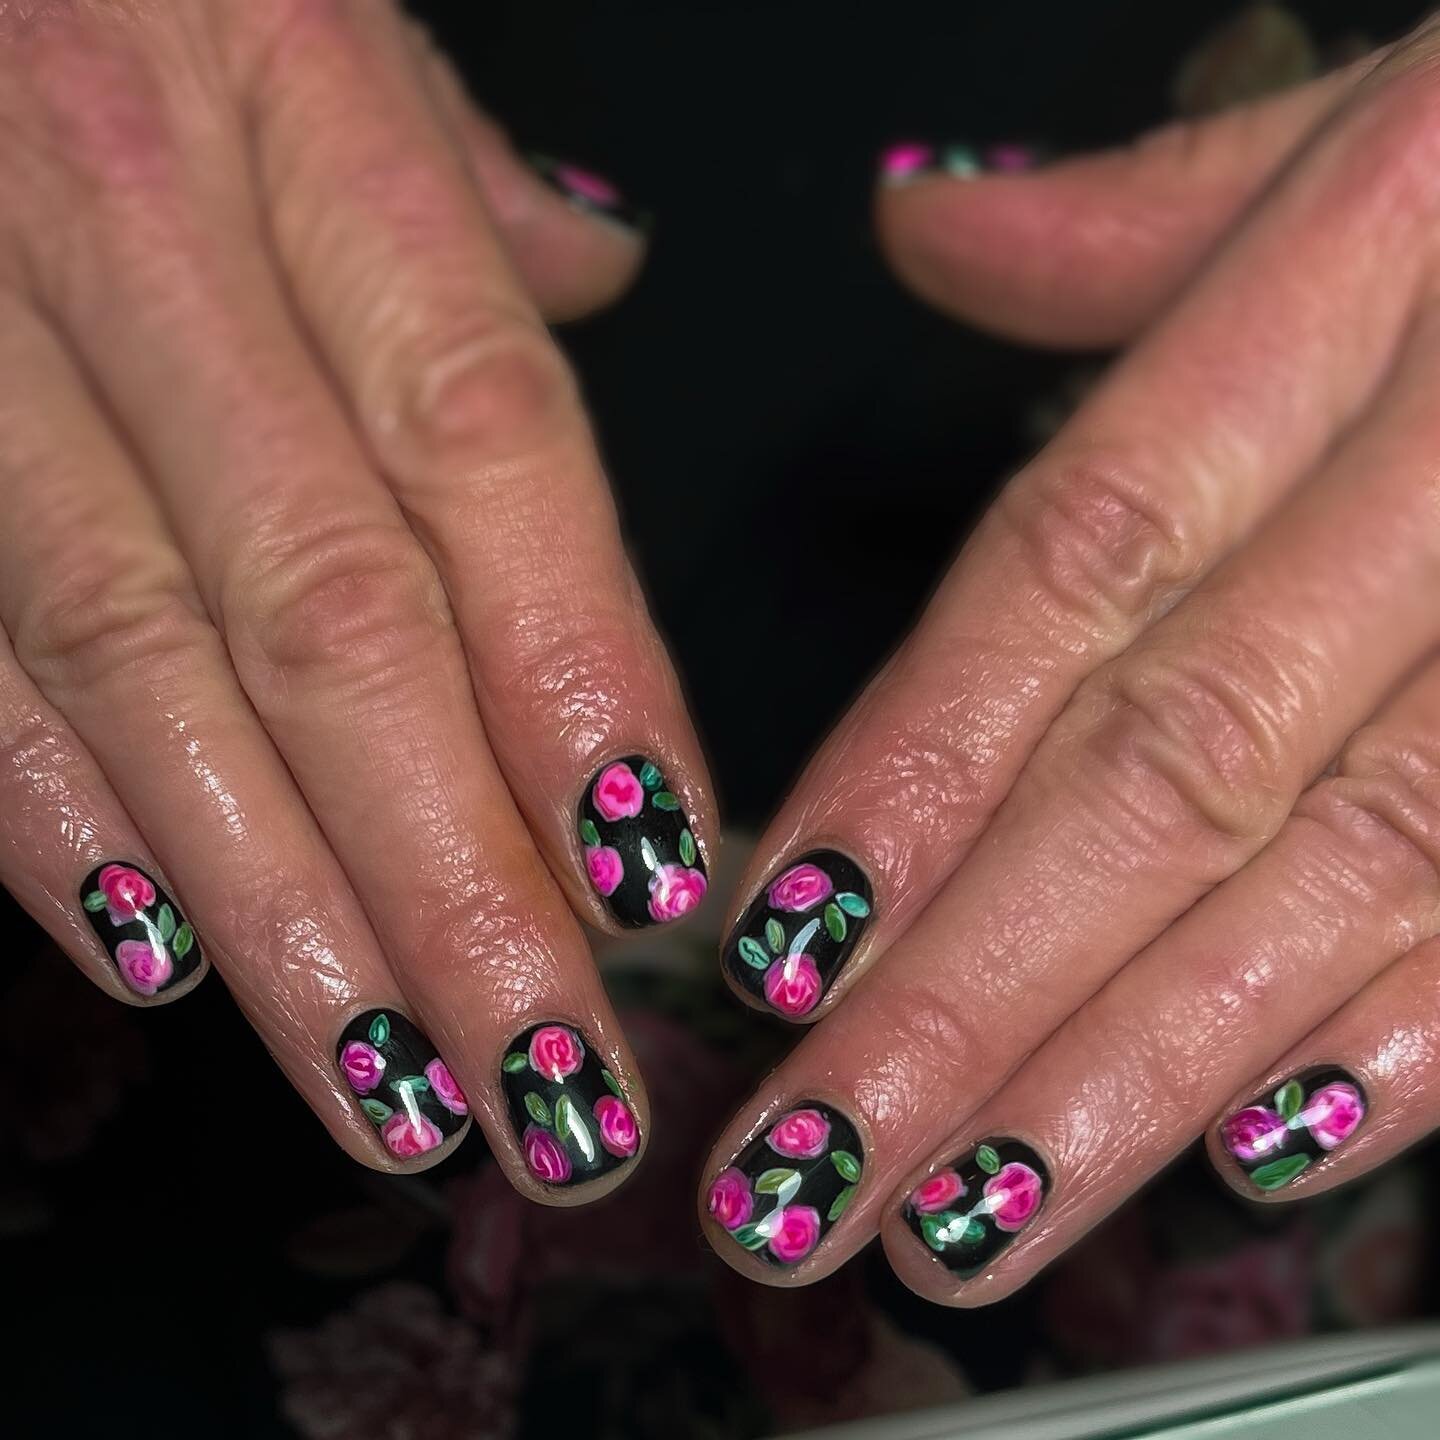 Peonies are my favourite flower and now maybe my new favourite nail art 🤔🥰

Inspo taken from the beautiful top in the background 

Painted using @the_gelbottle_inc 

Brushes @brillbirduk 

Prep @officialnavyprofessional 

Nail art add on - Intricat